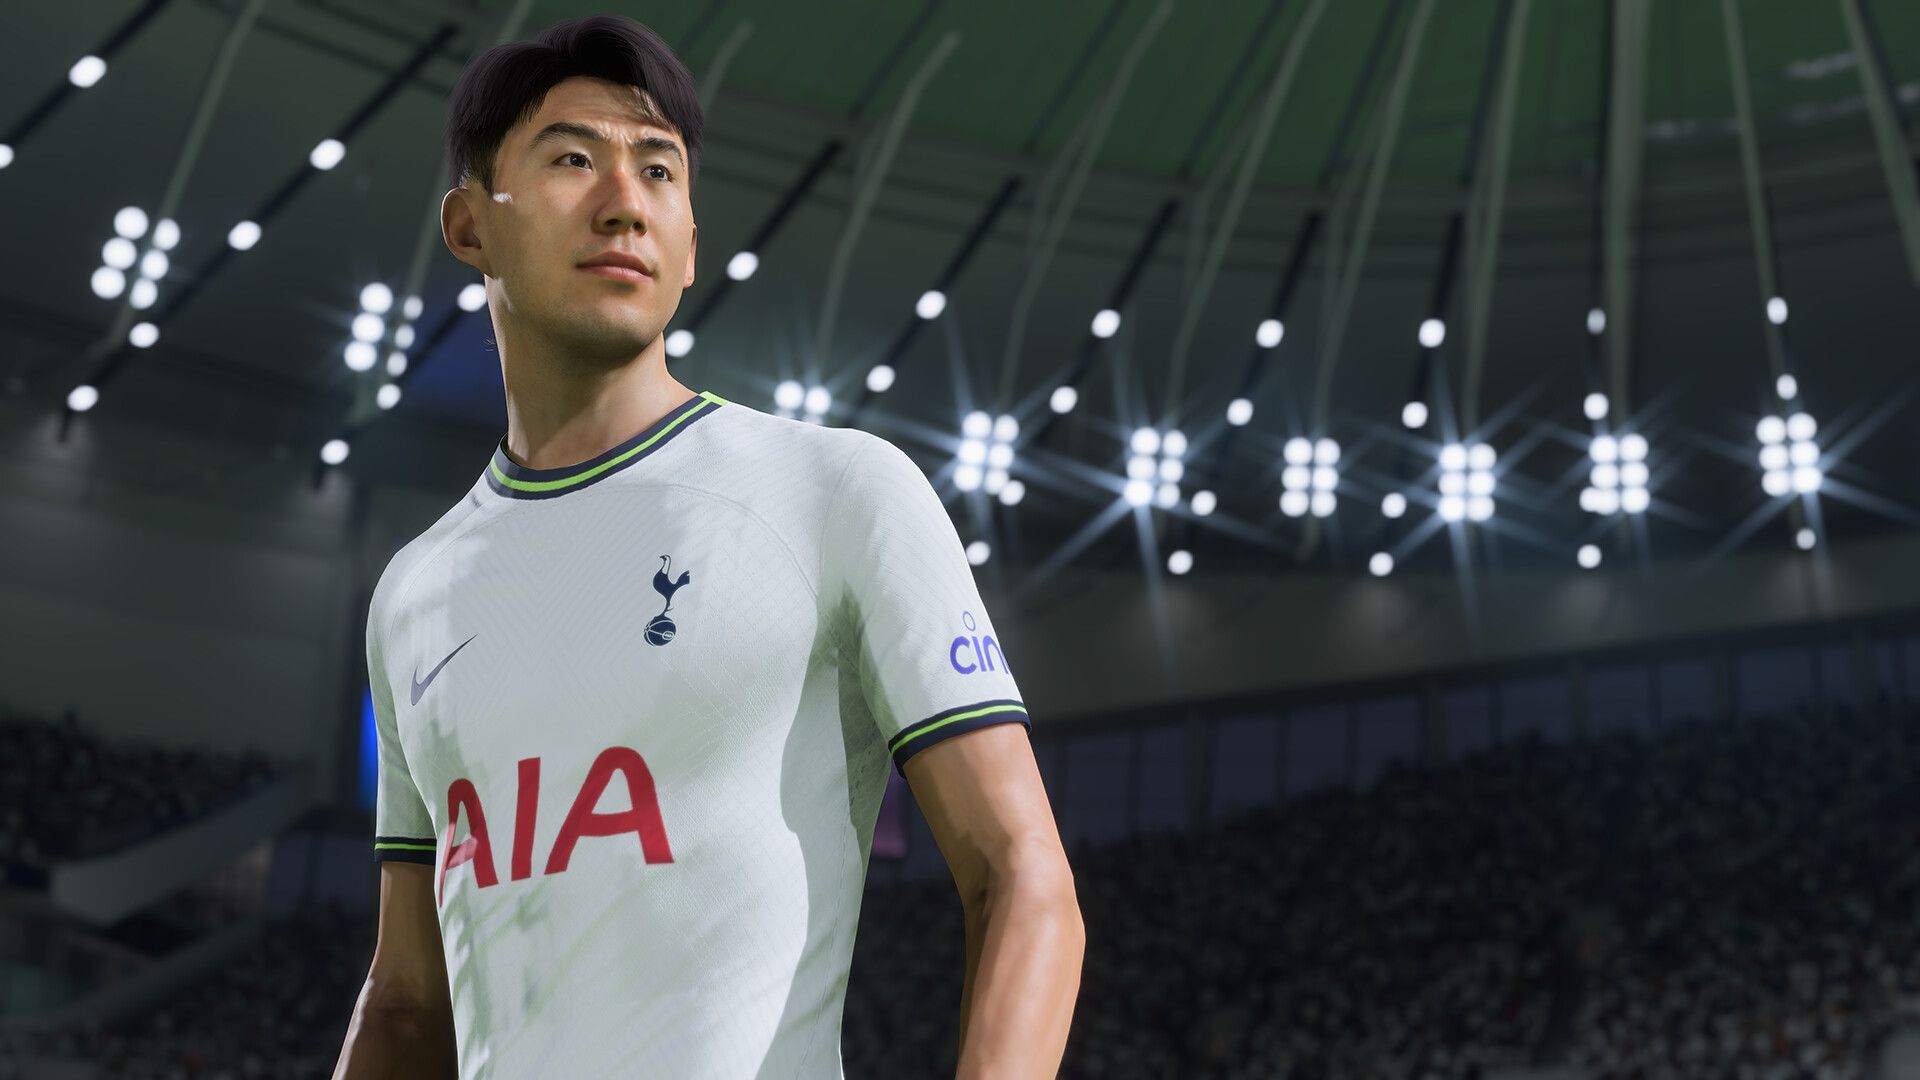 In this article, we are going to cover FIFA 23 cloud gaming and Which cloud gaming services it is available on, so you can enjoy it via your preferred service.